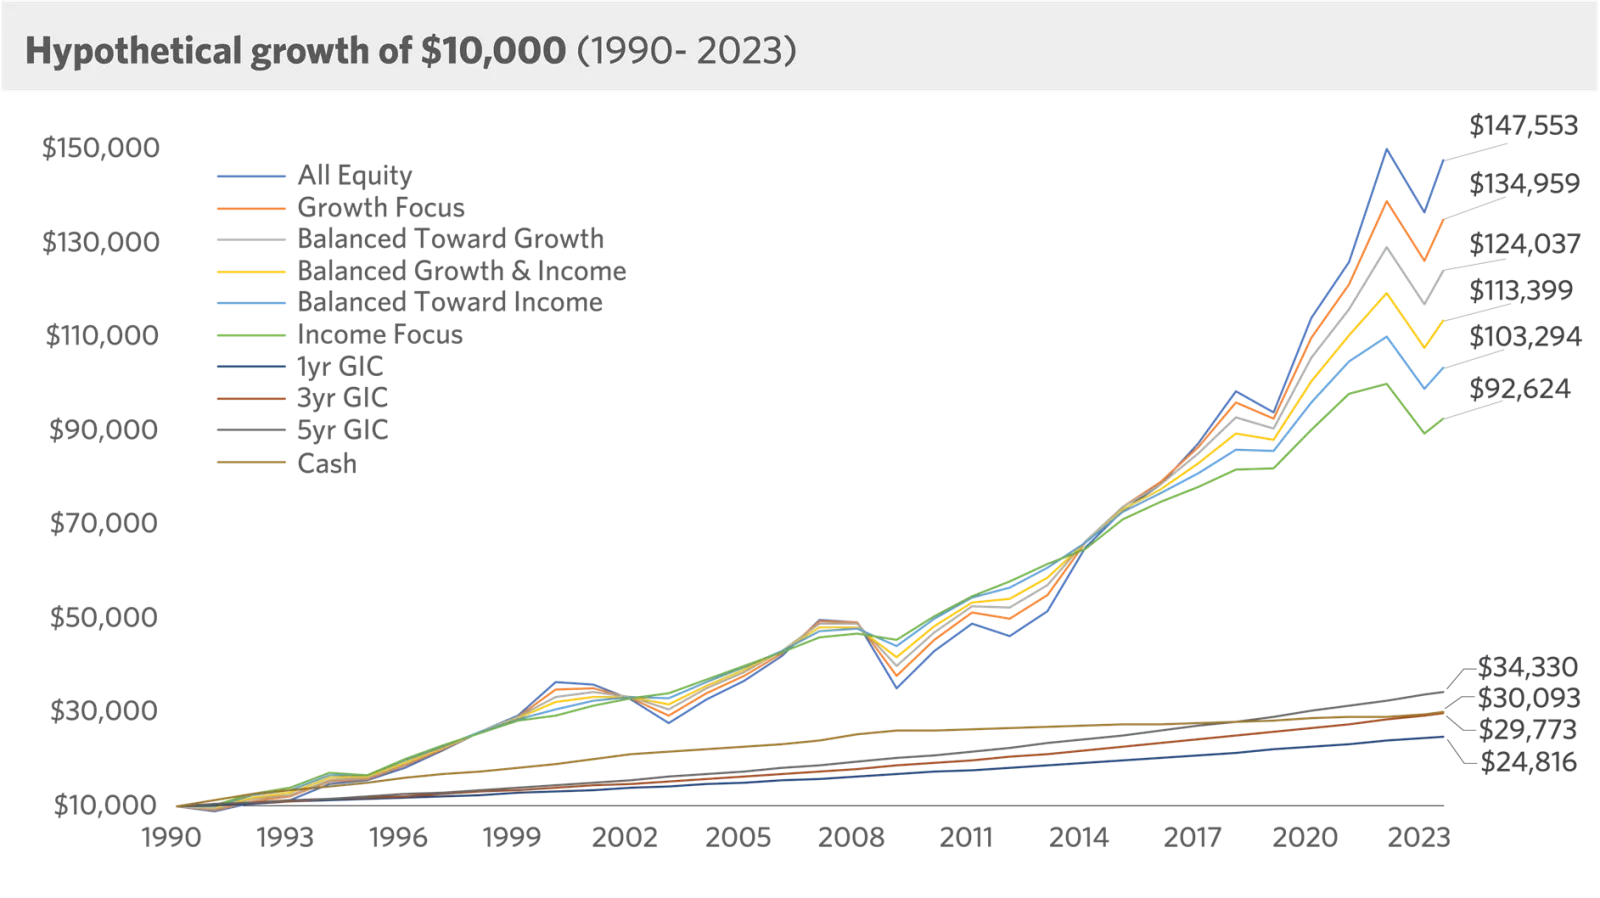  Above chart refers to Hypothetical growth of $10,000 (1990-2023)
